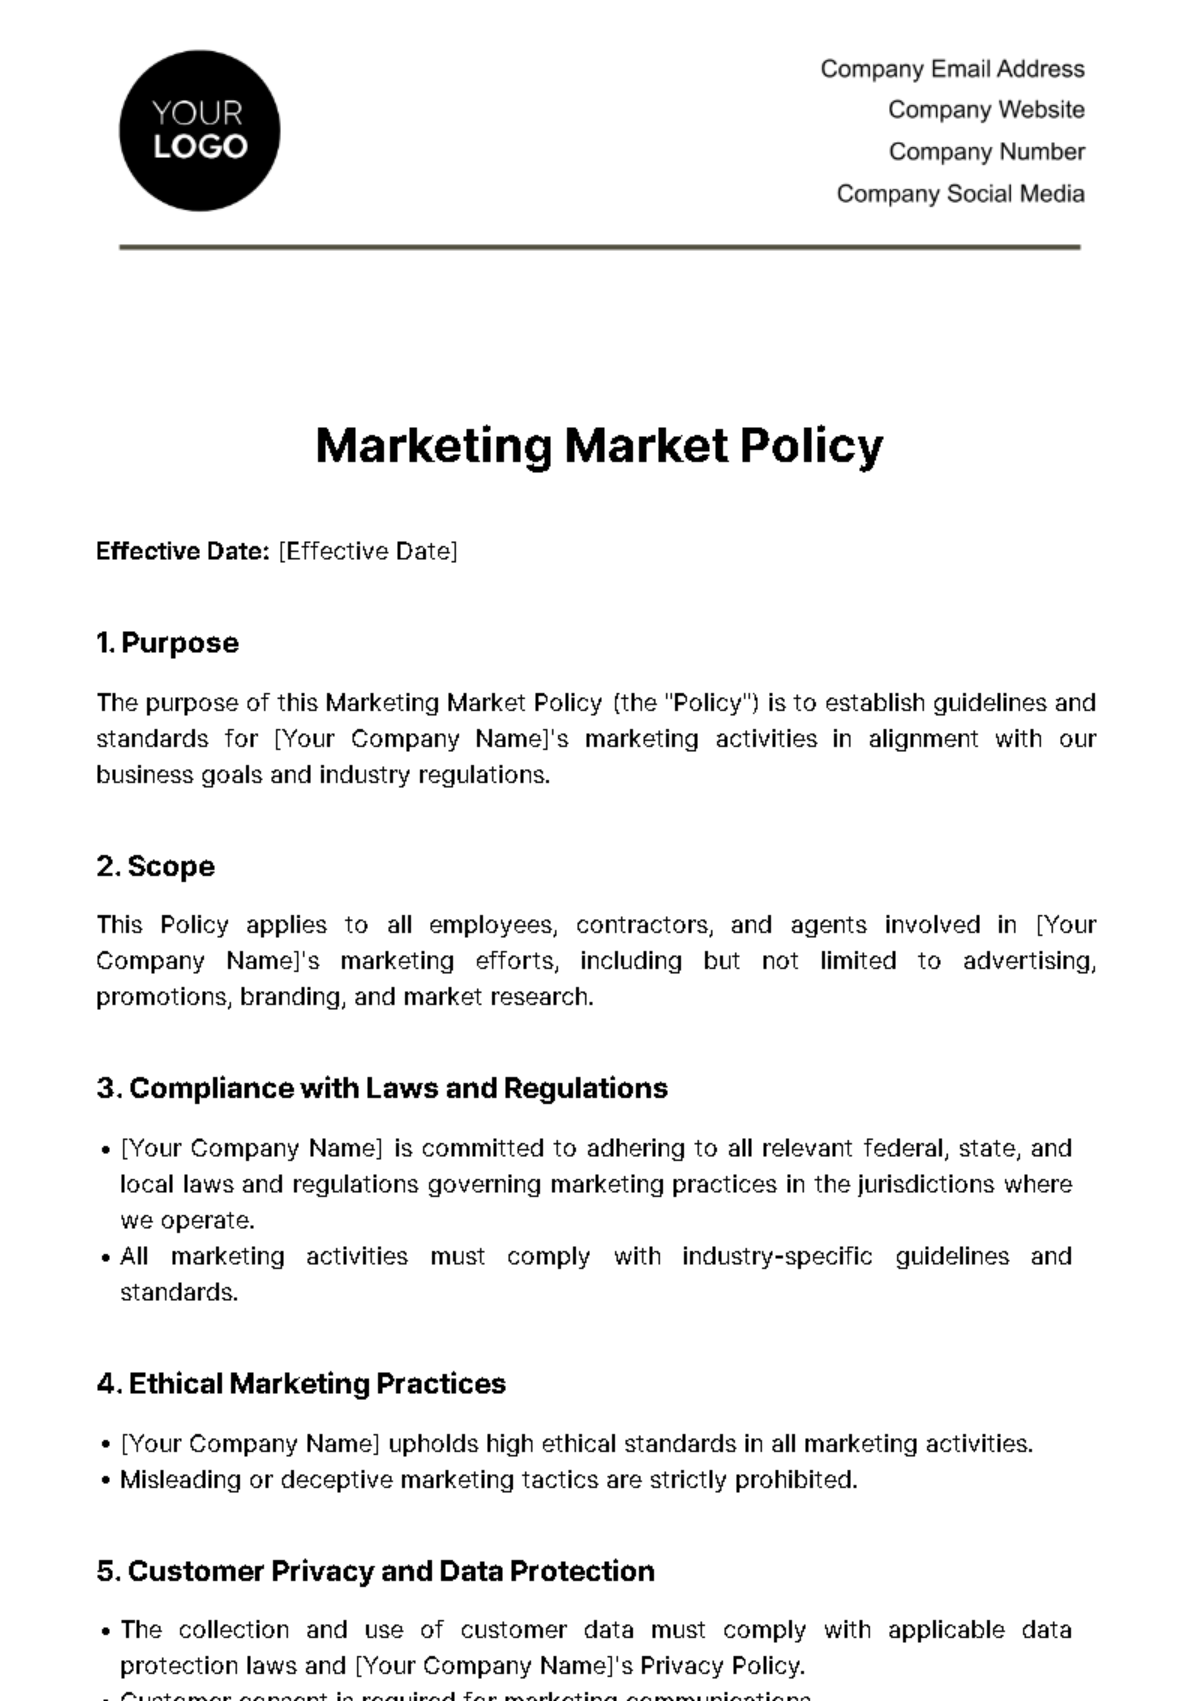 Free Marketing Market Policy Template